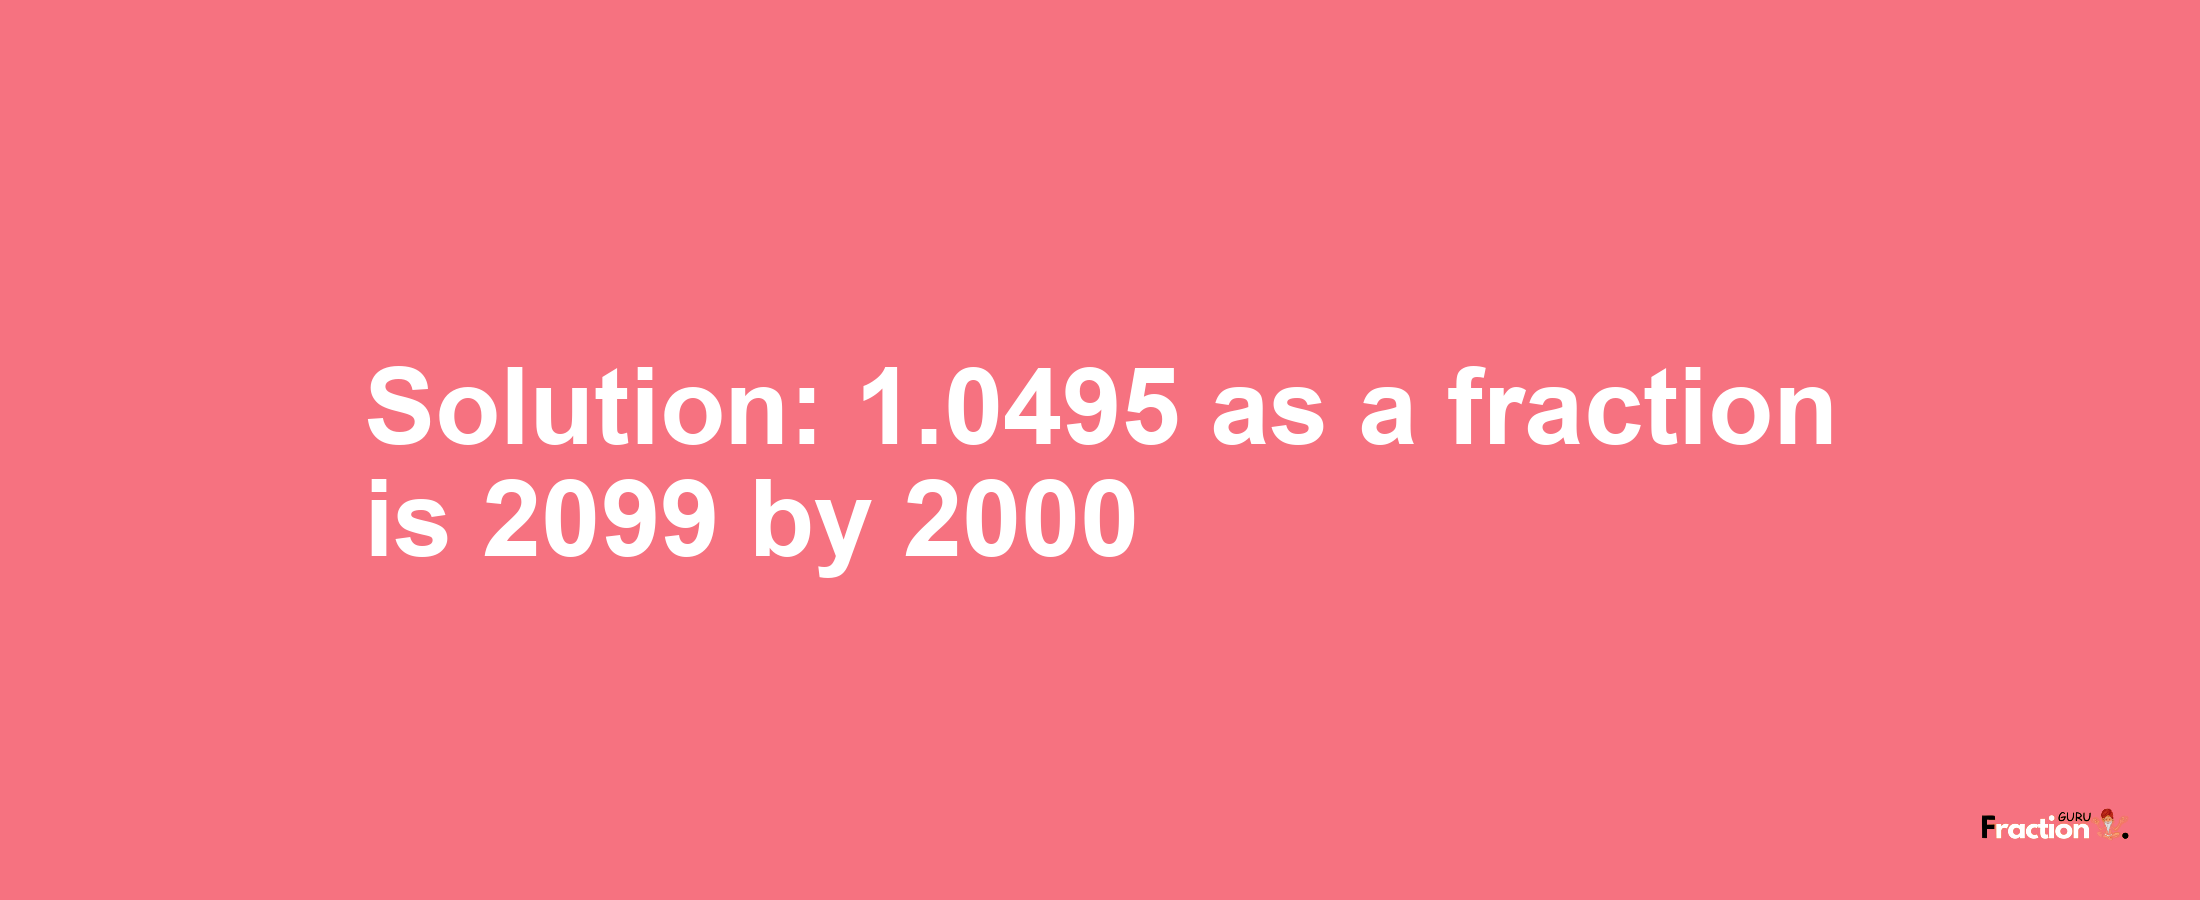 Solution:1.0495 as a fraction is 2099/2000